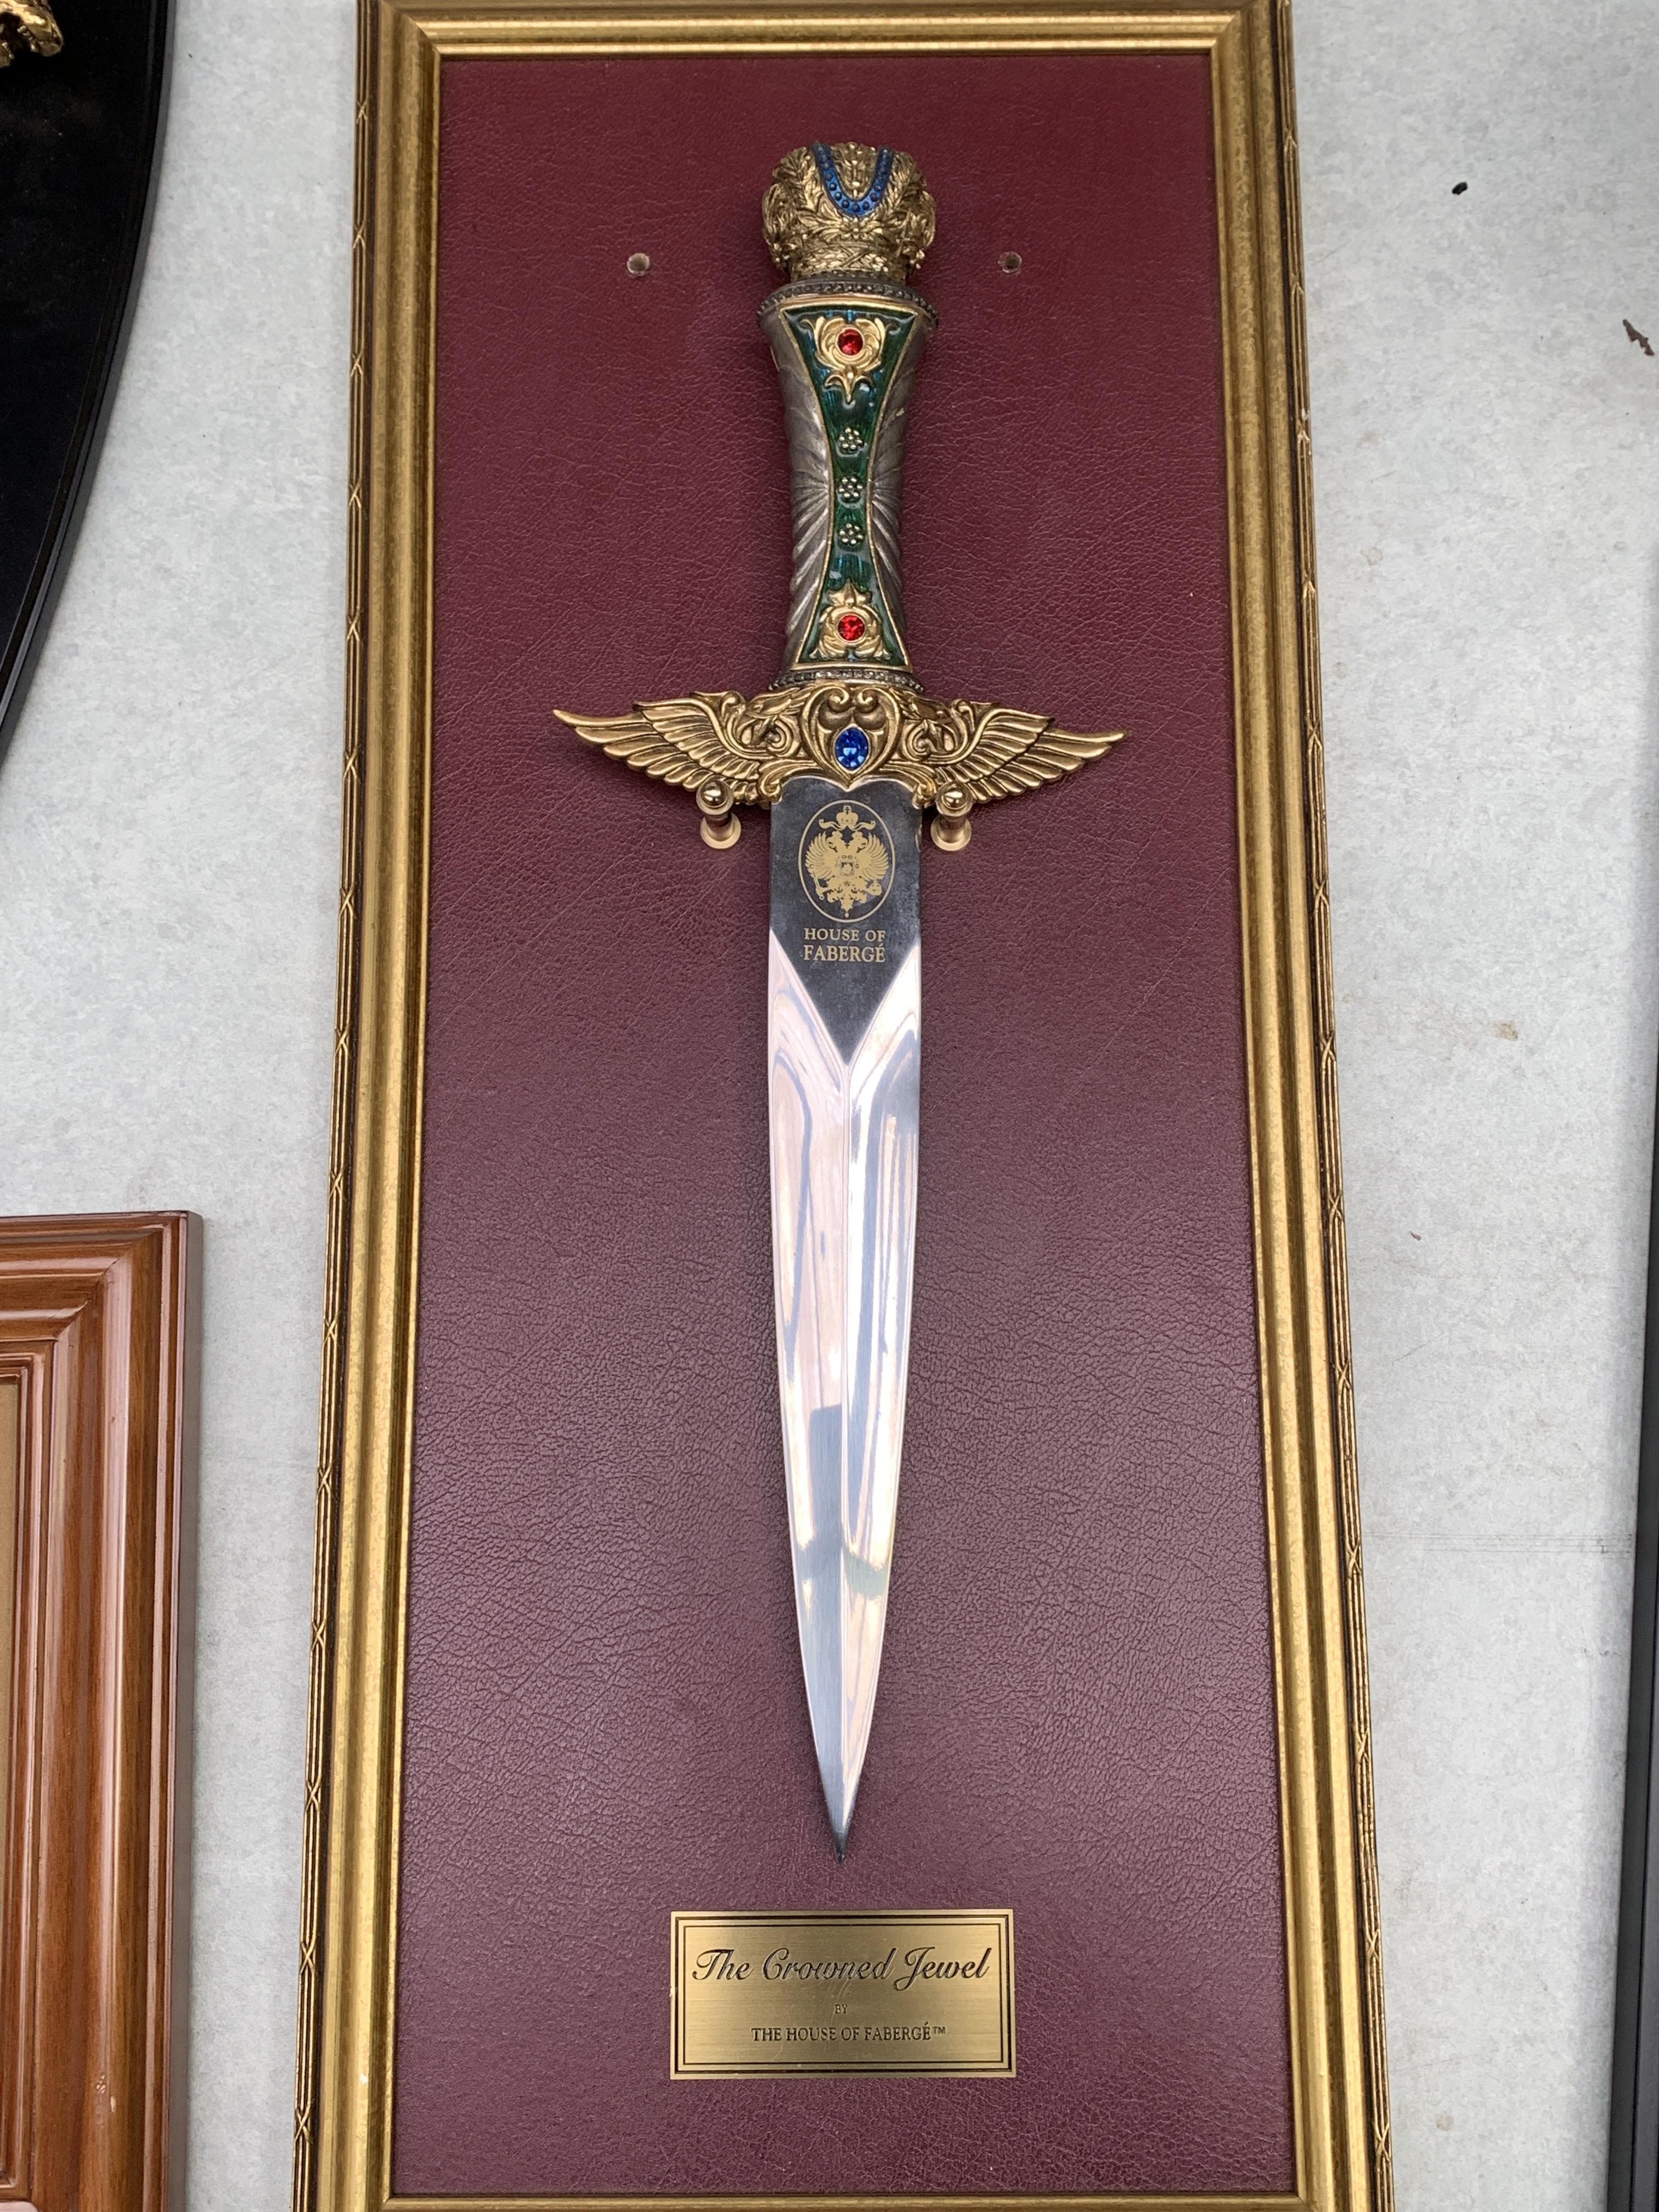 Franklin Mint Crowned Jewel knife by House of Faberge